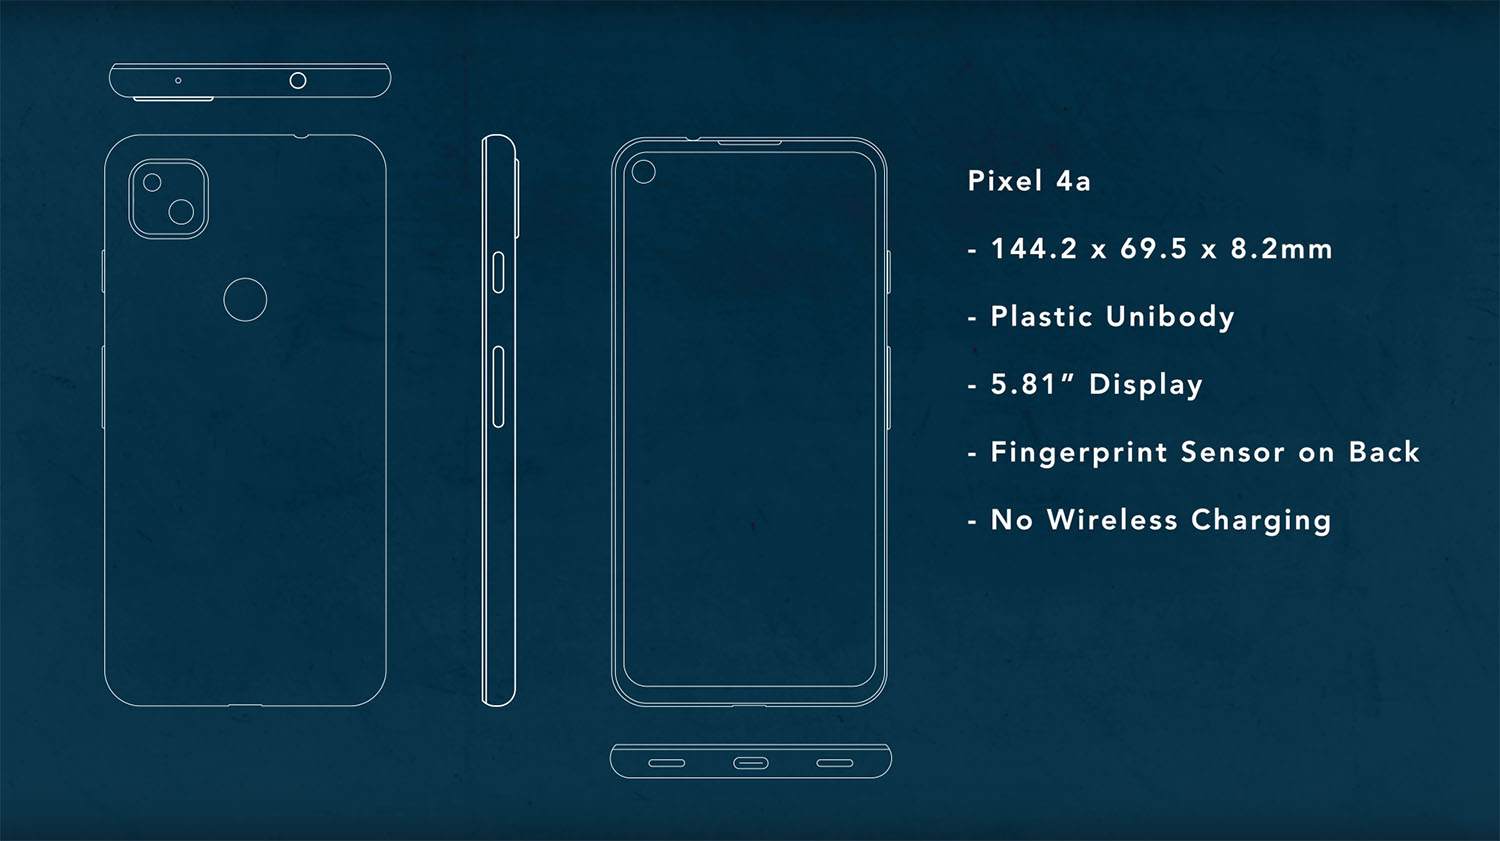 Google Pixel 4a Specs and Features Leaks